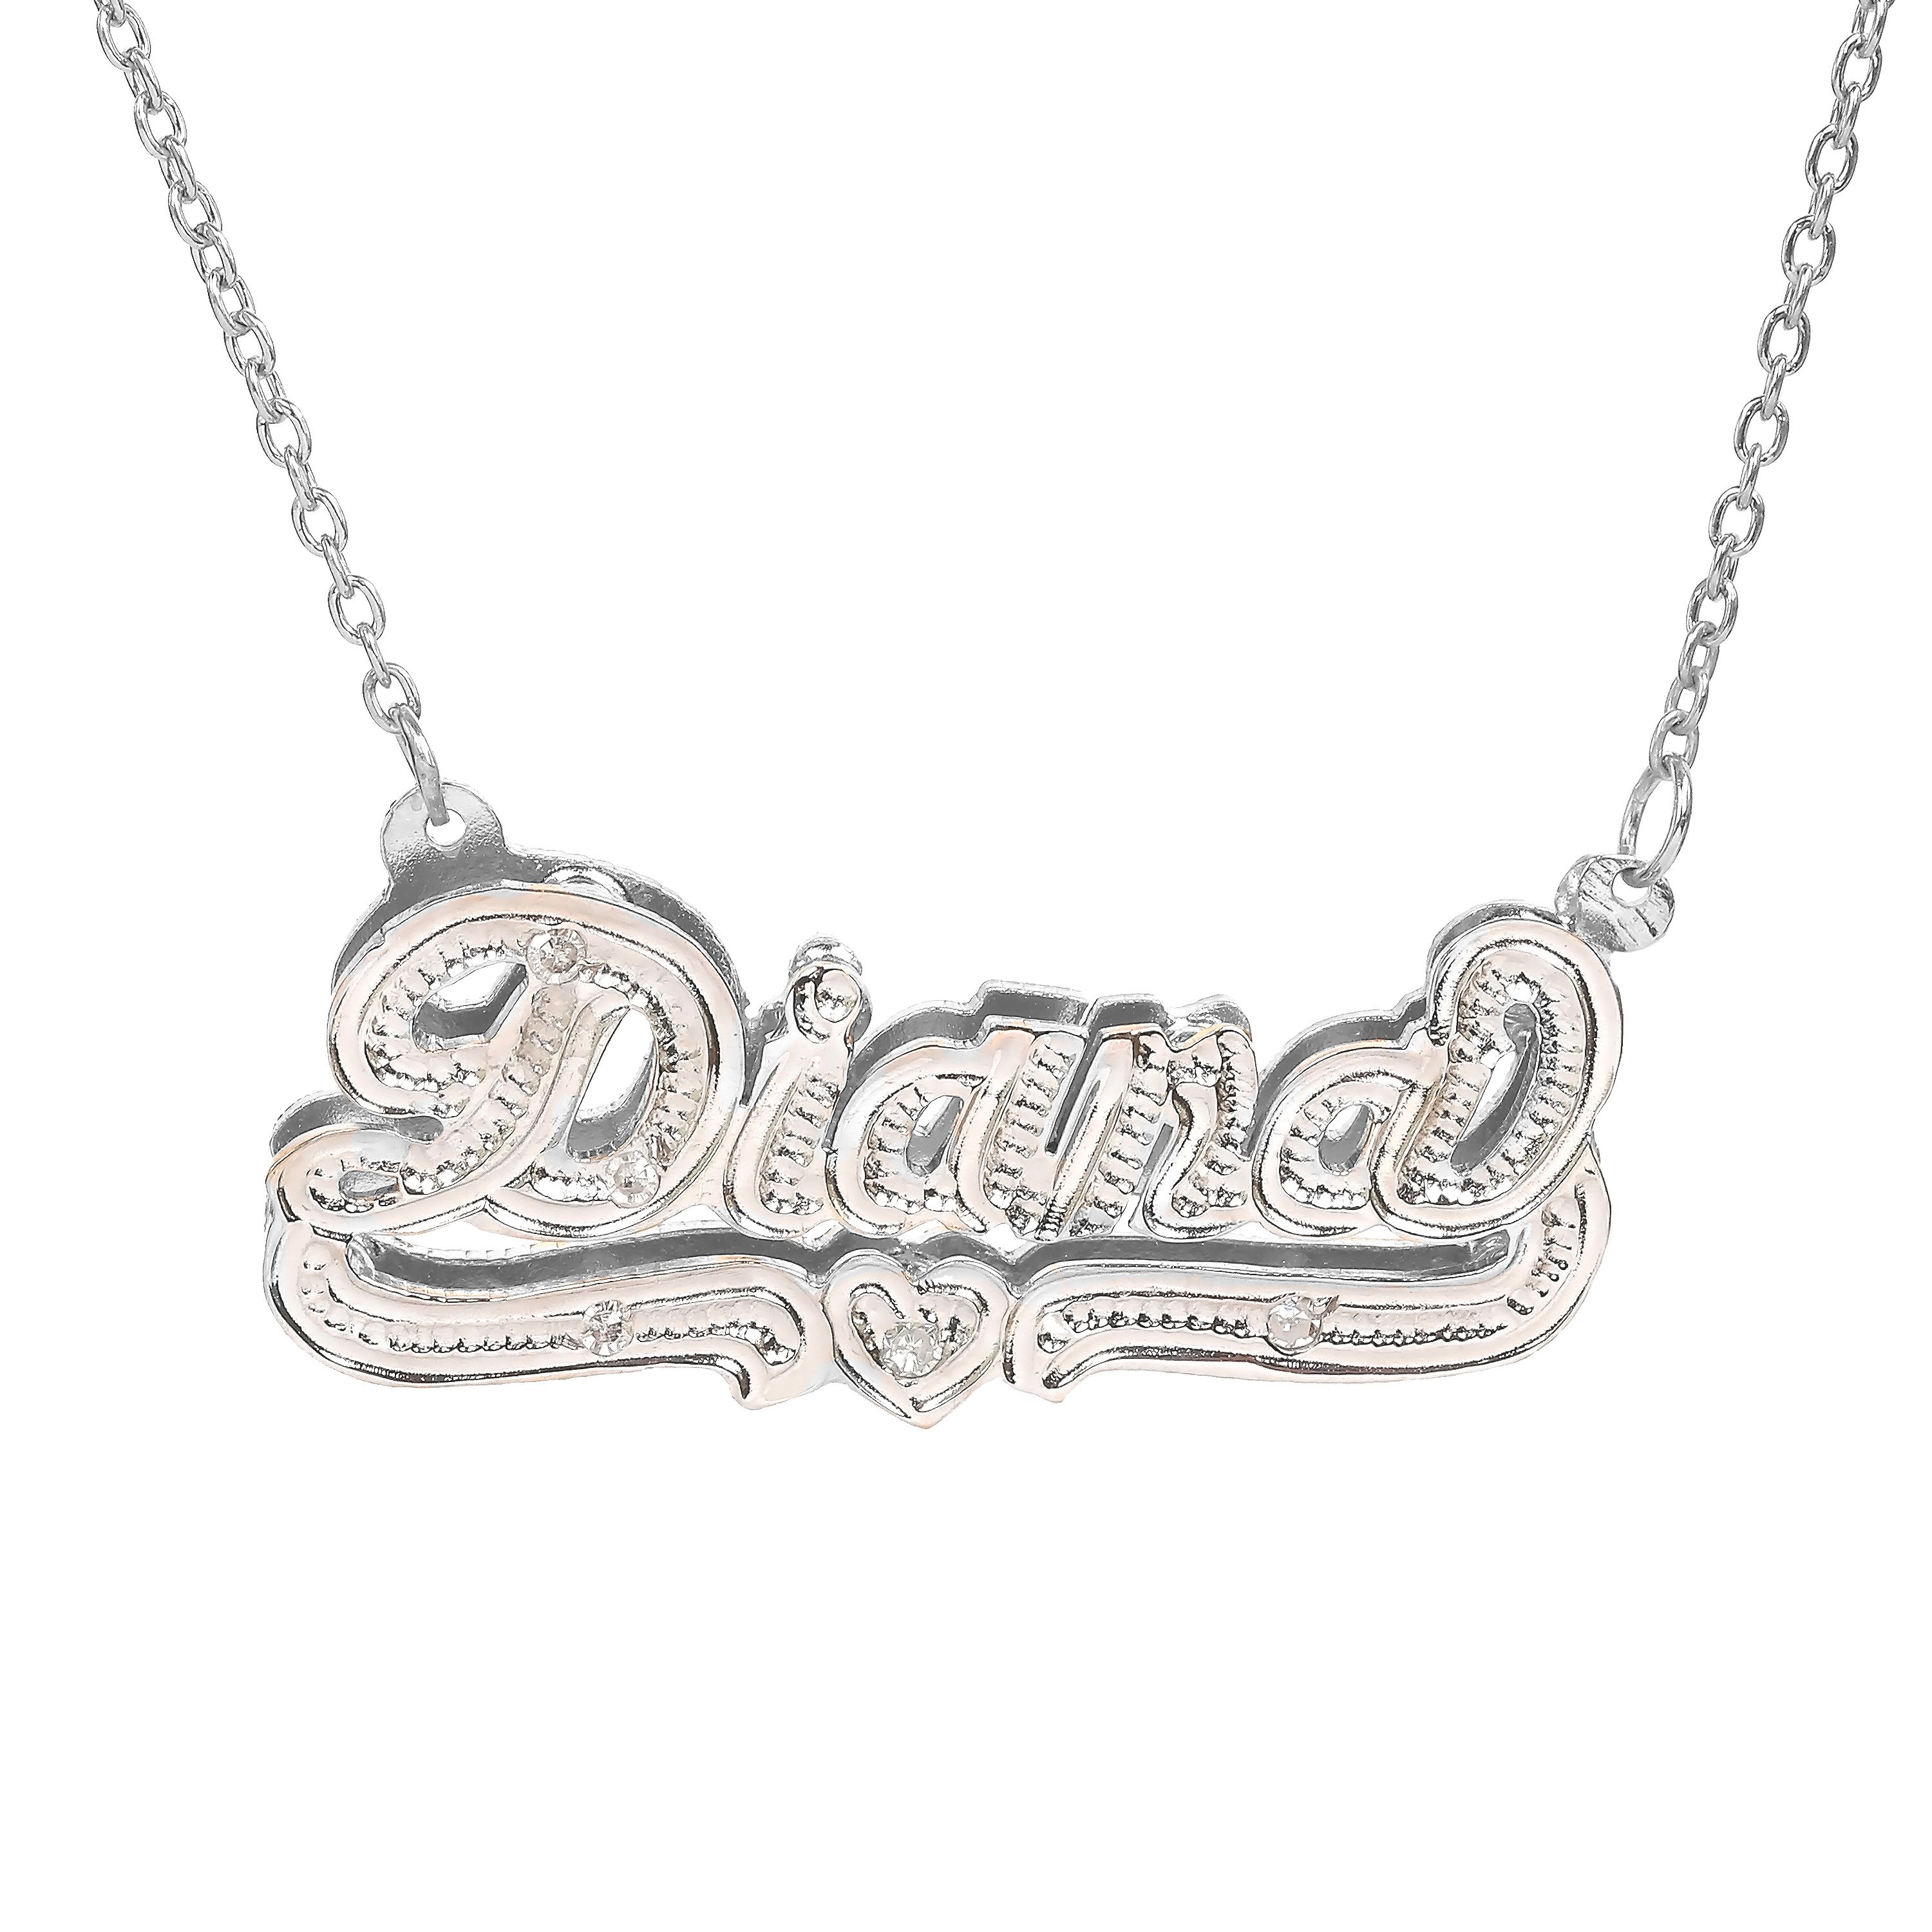 Fingerhut Jay Aimee Designs Sterling Silver Personalized Name Pendant Necklace